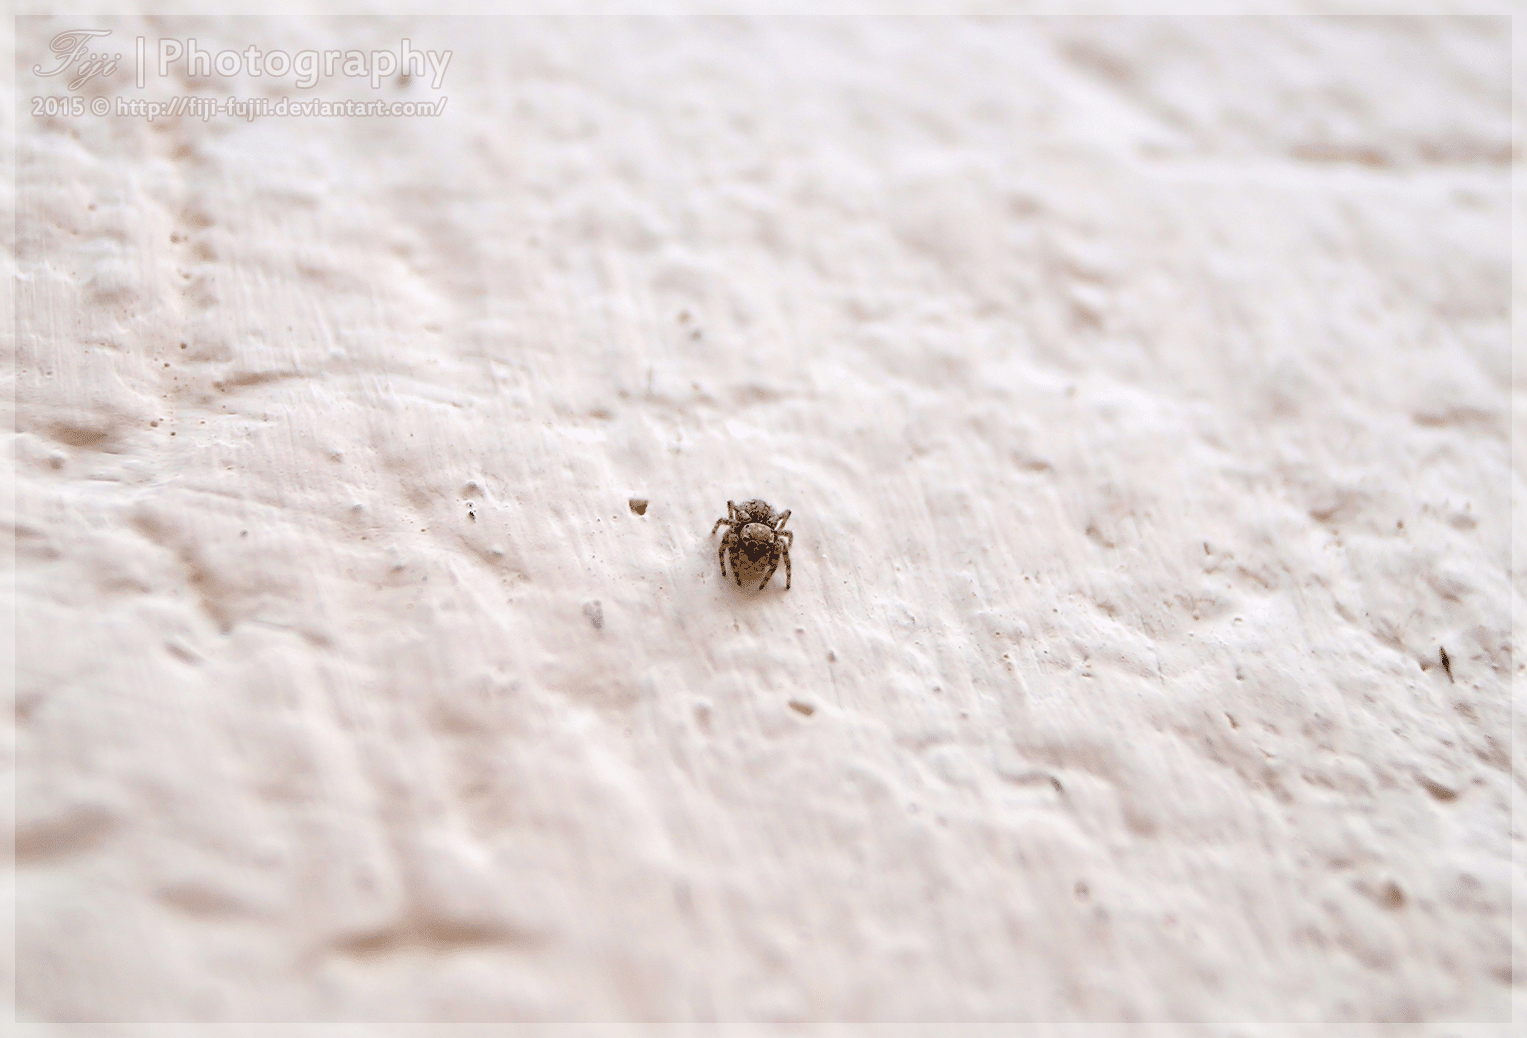 'nother Tiny Jumping Spider